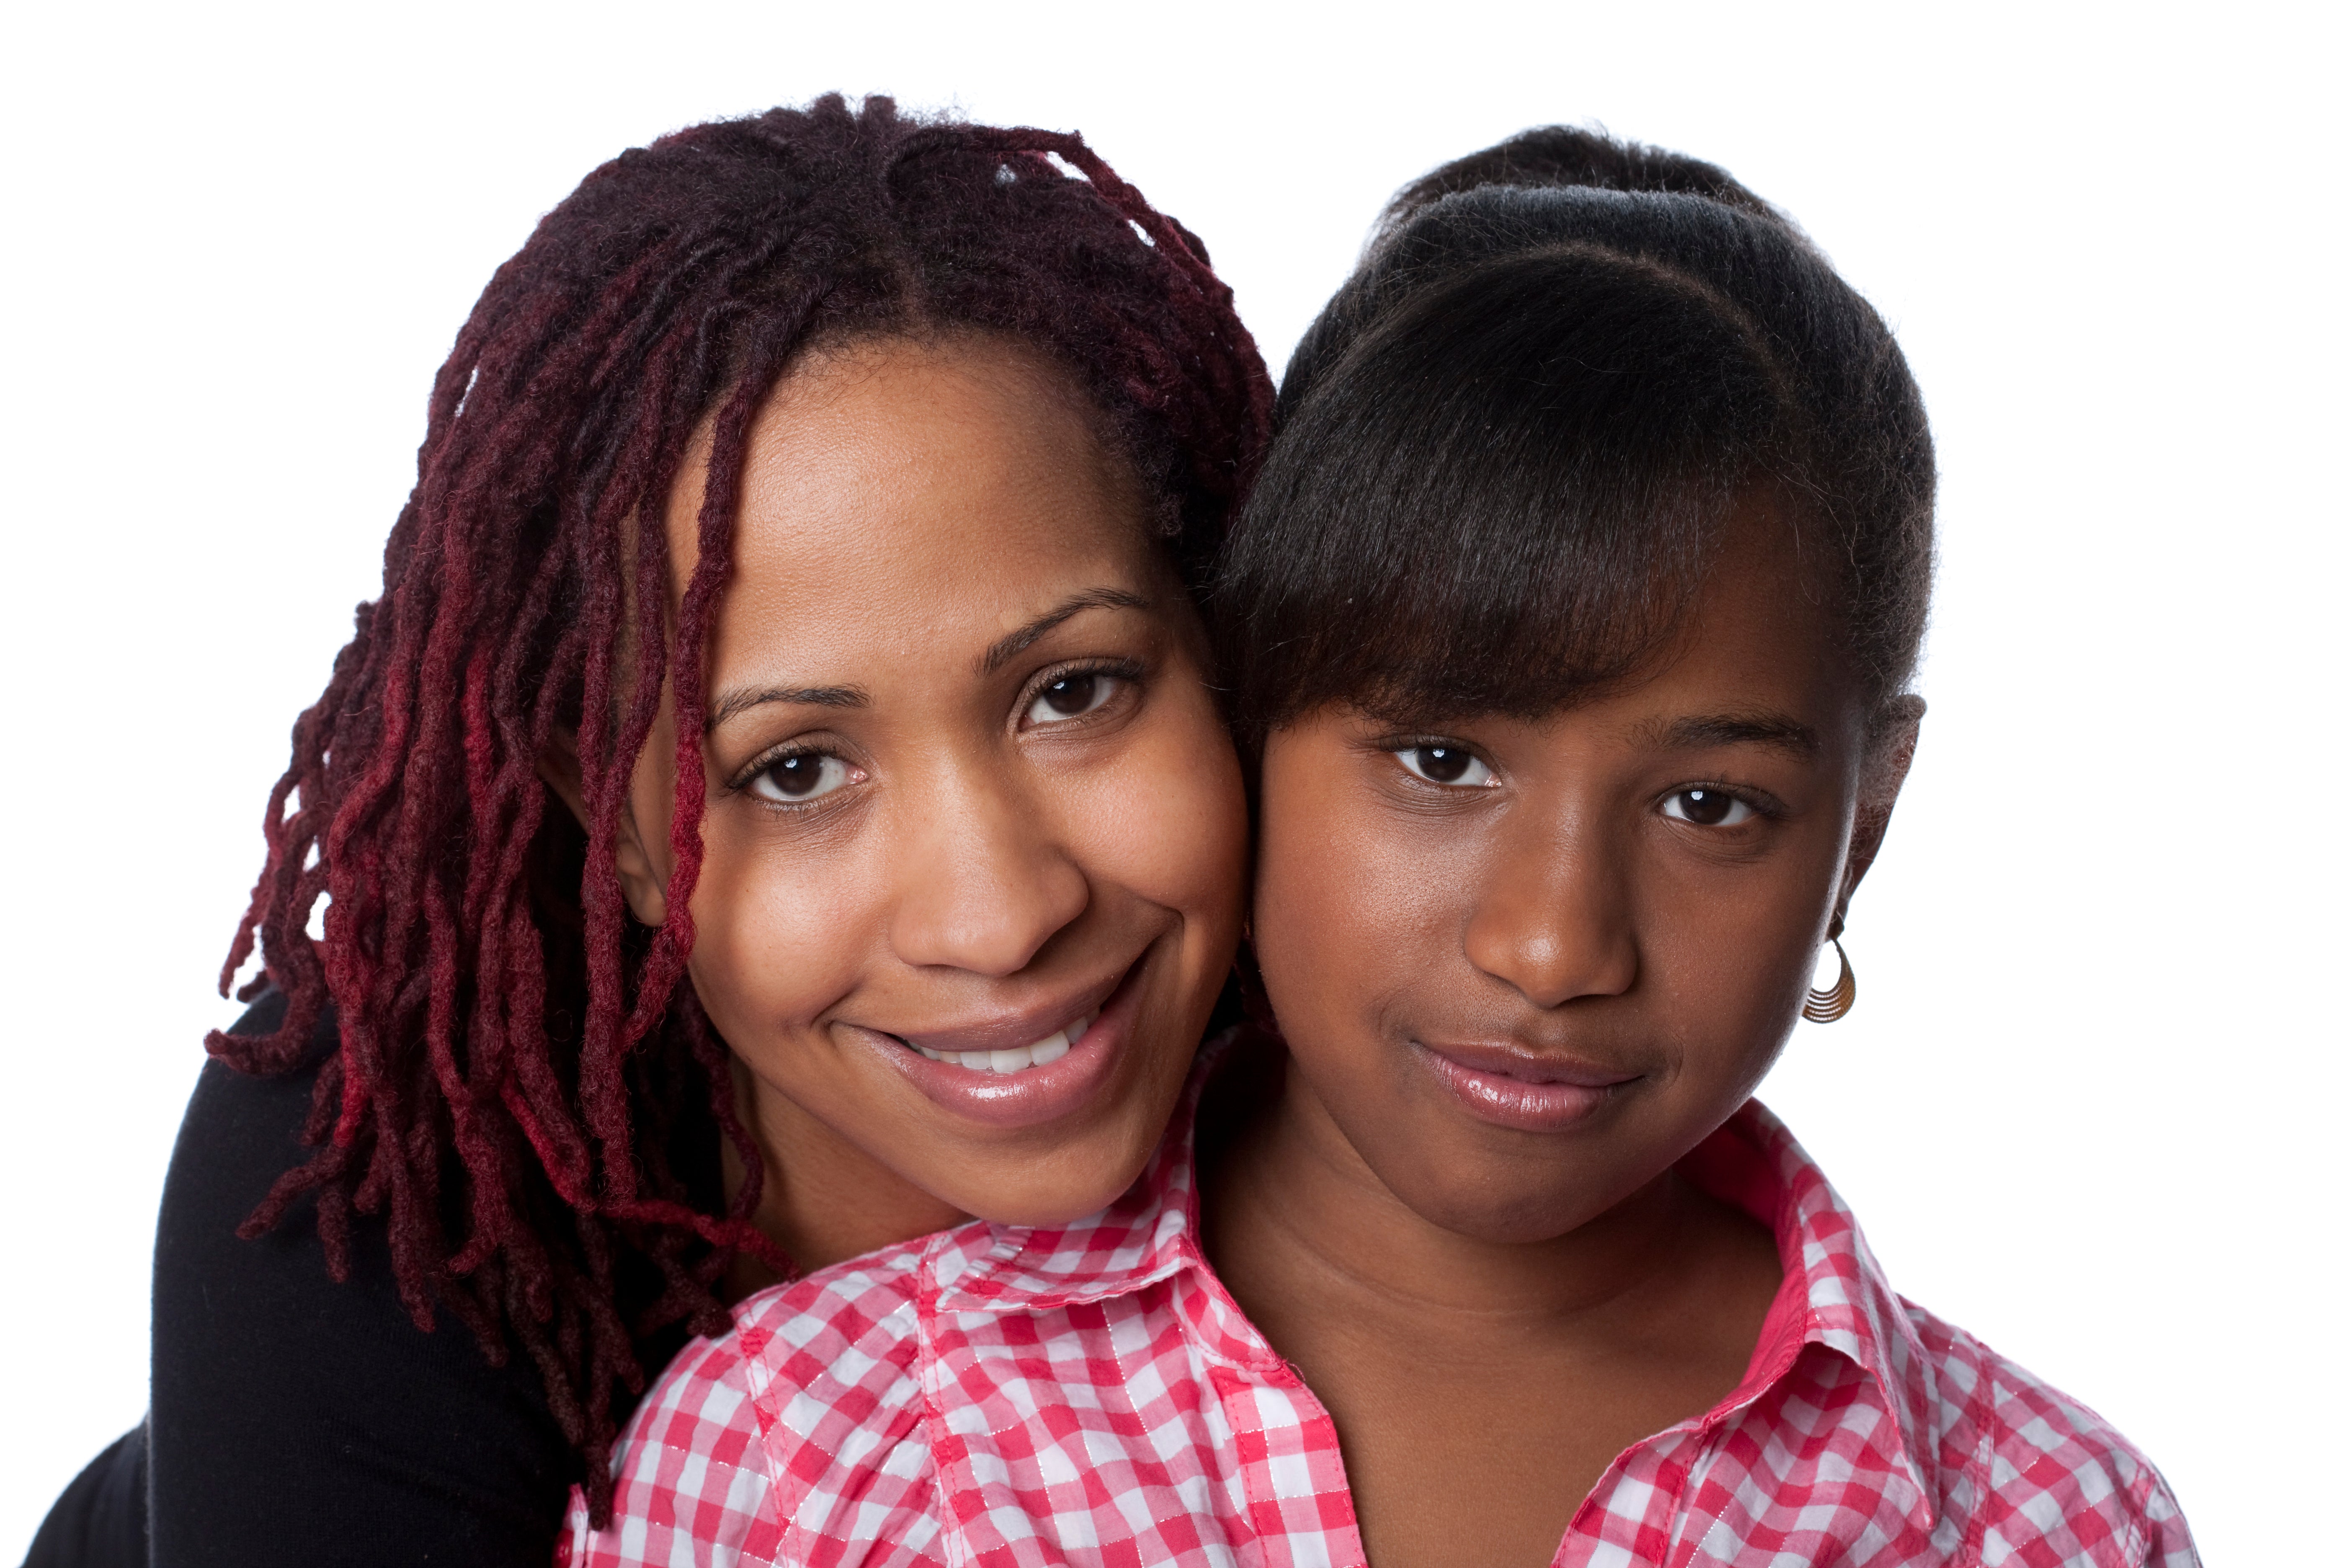 Black Moms Do More Than Cook, Cuss and Beat Kids